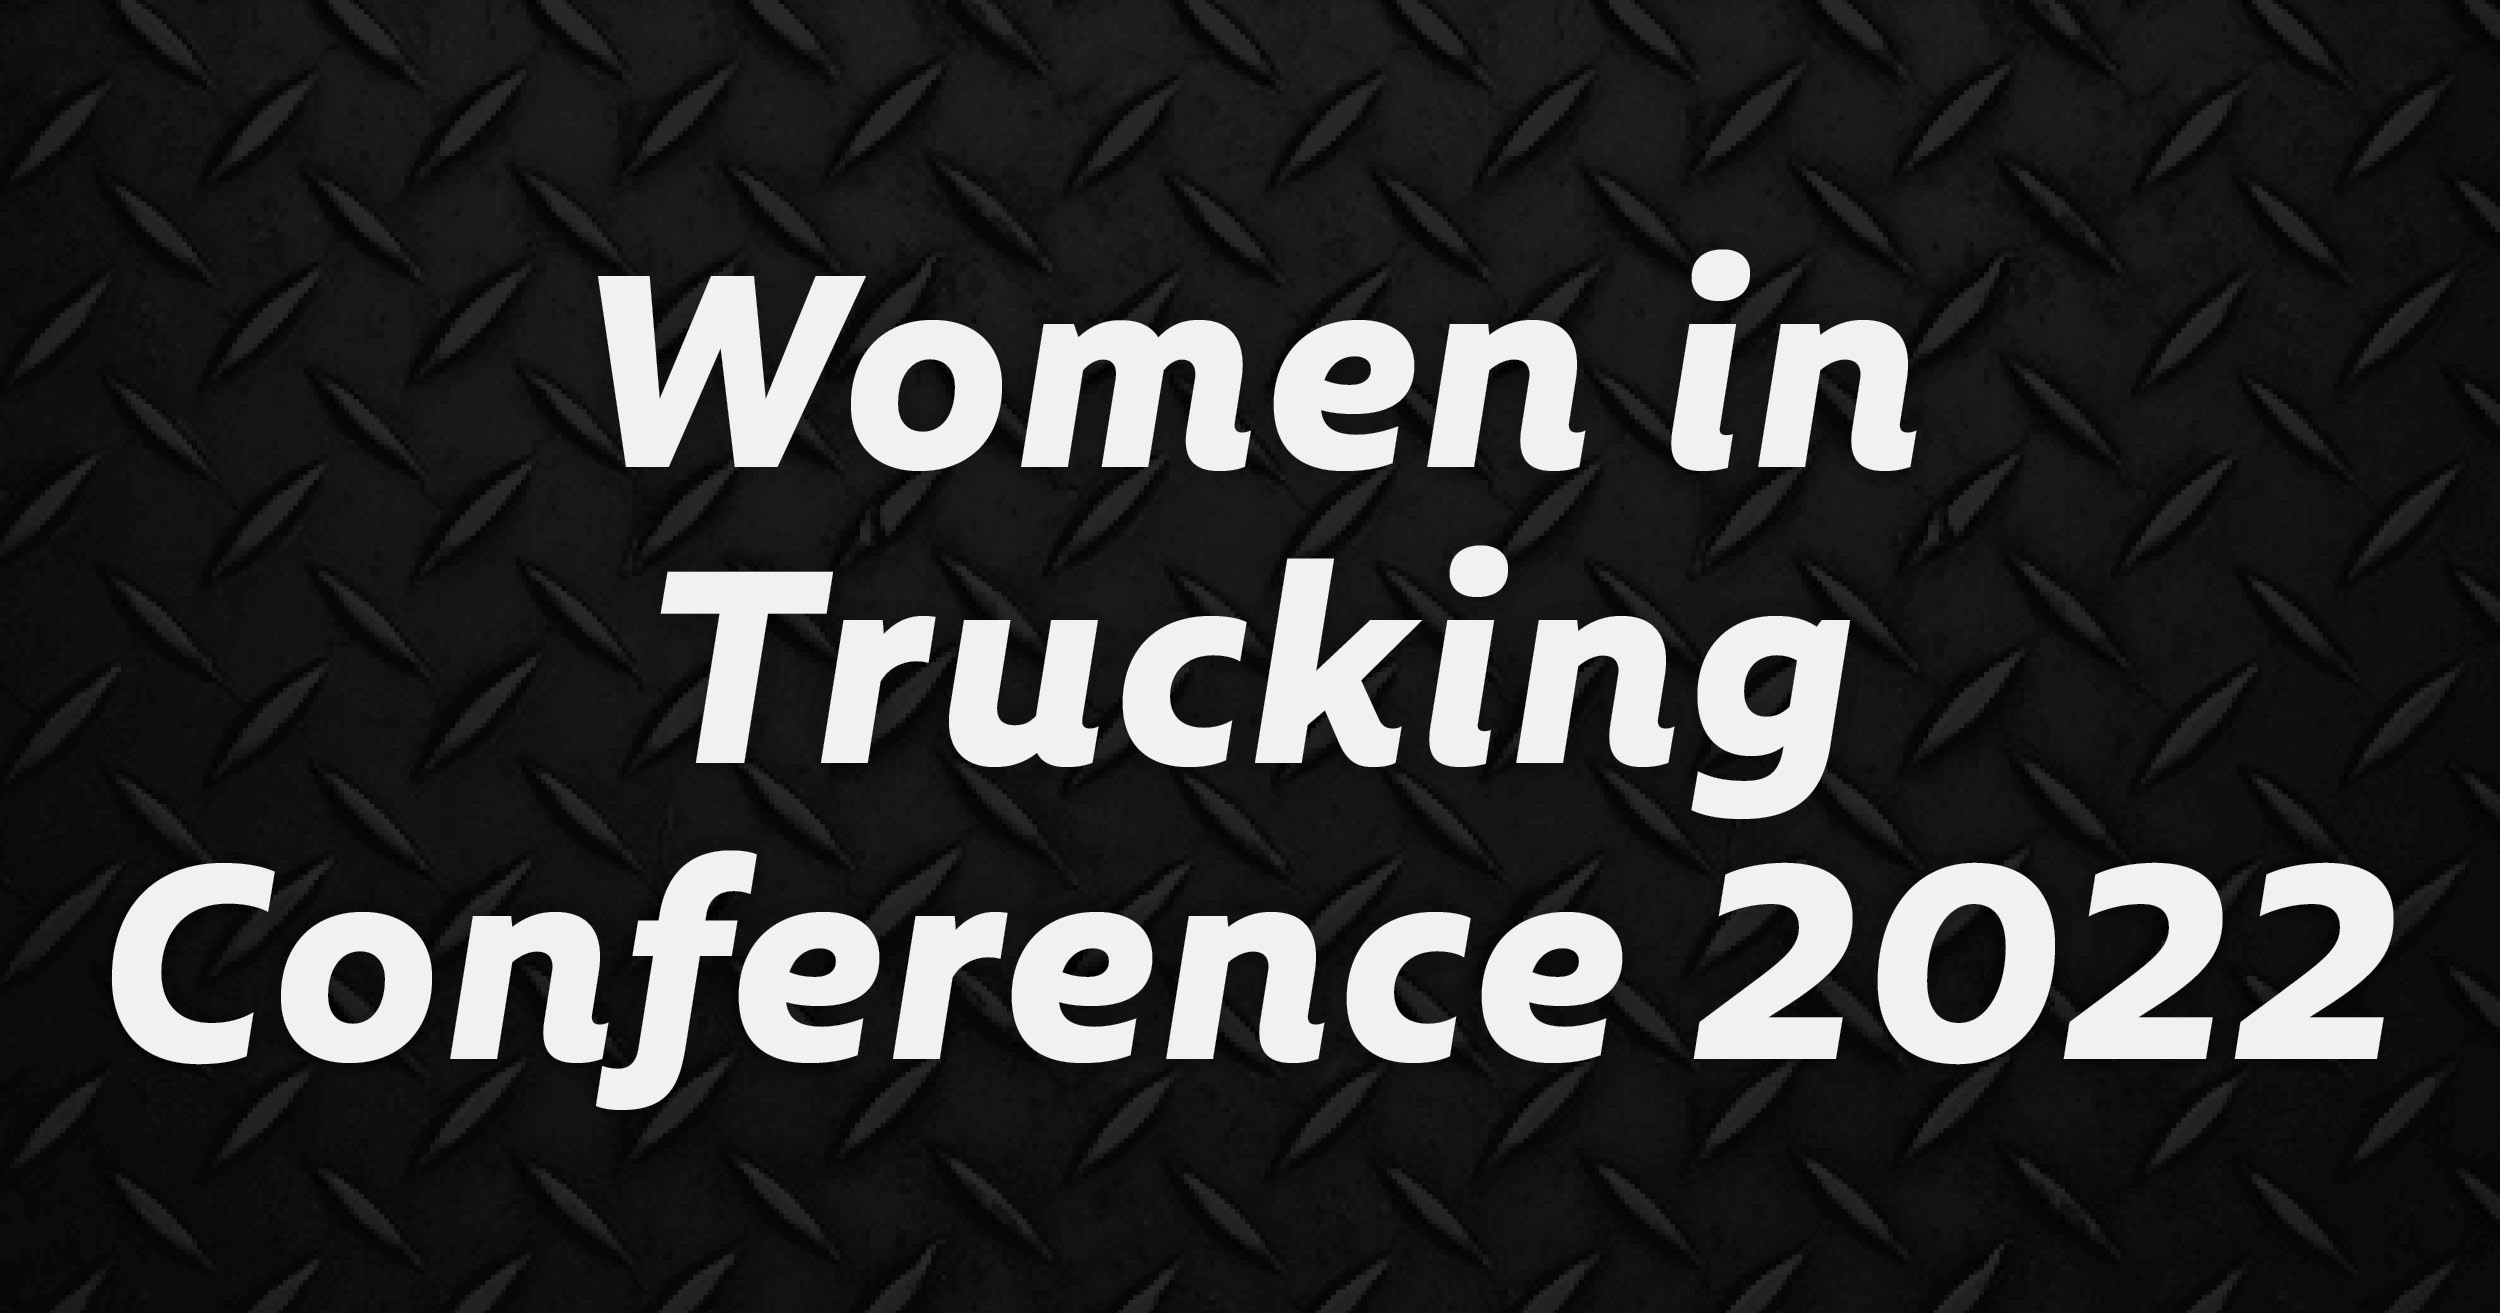 Accelerate! Women in Trucking Conference 2022